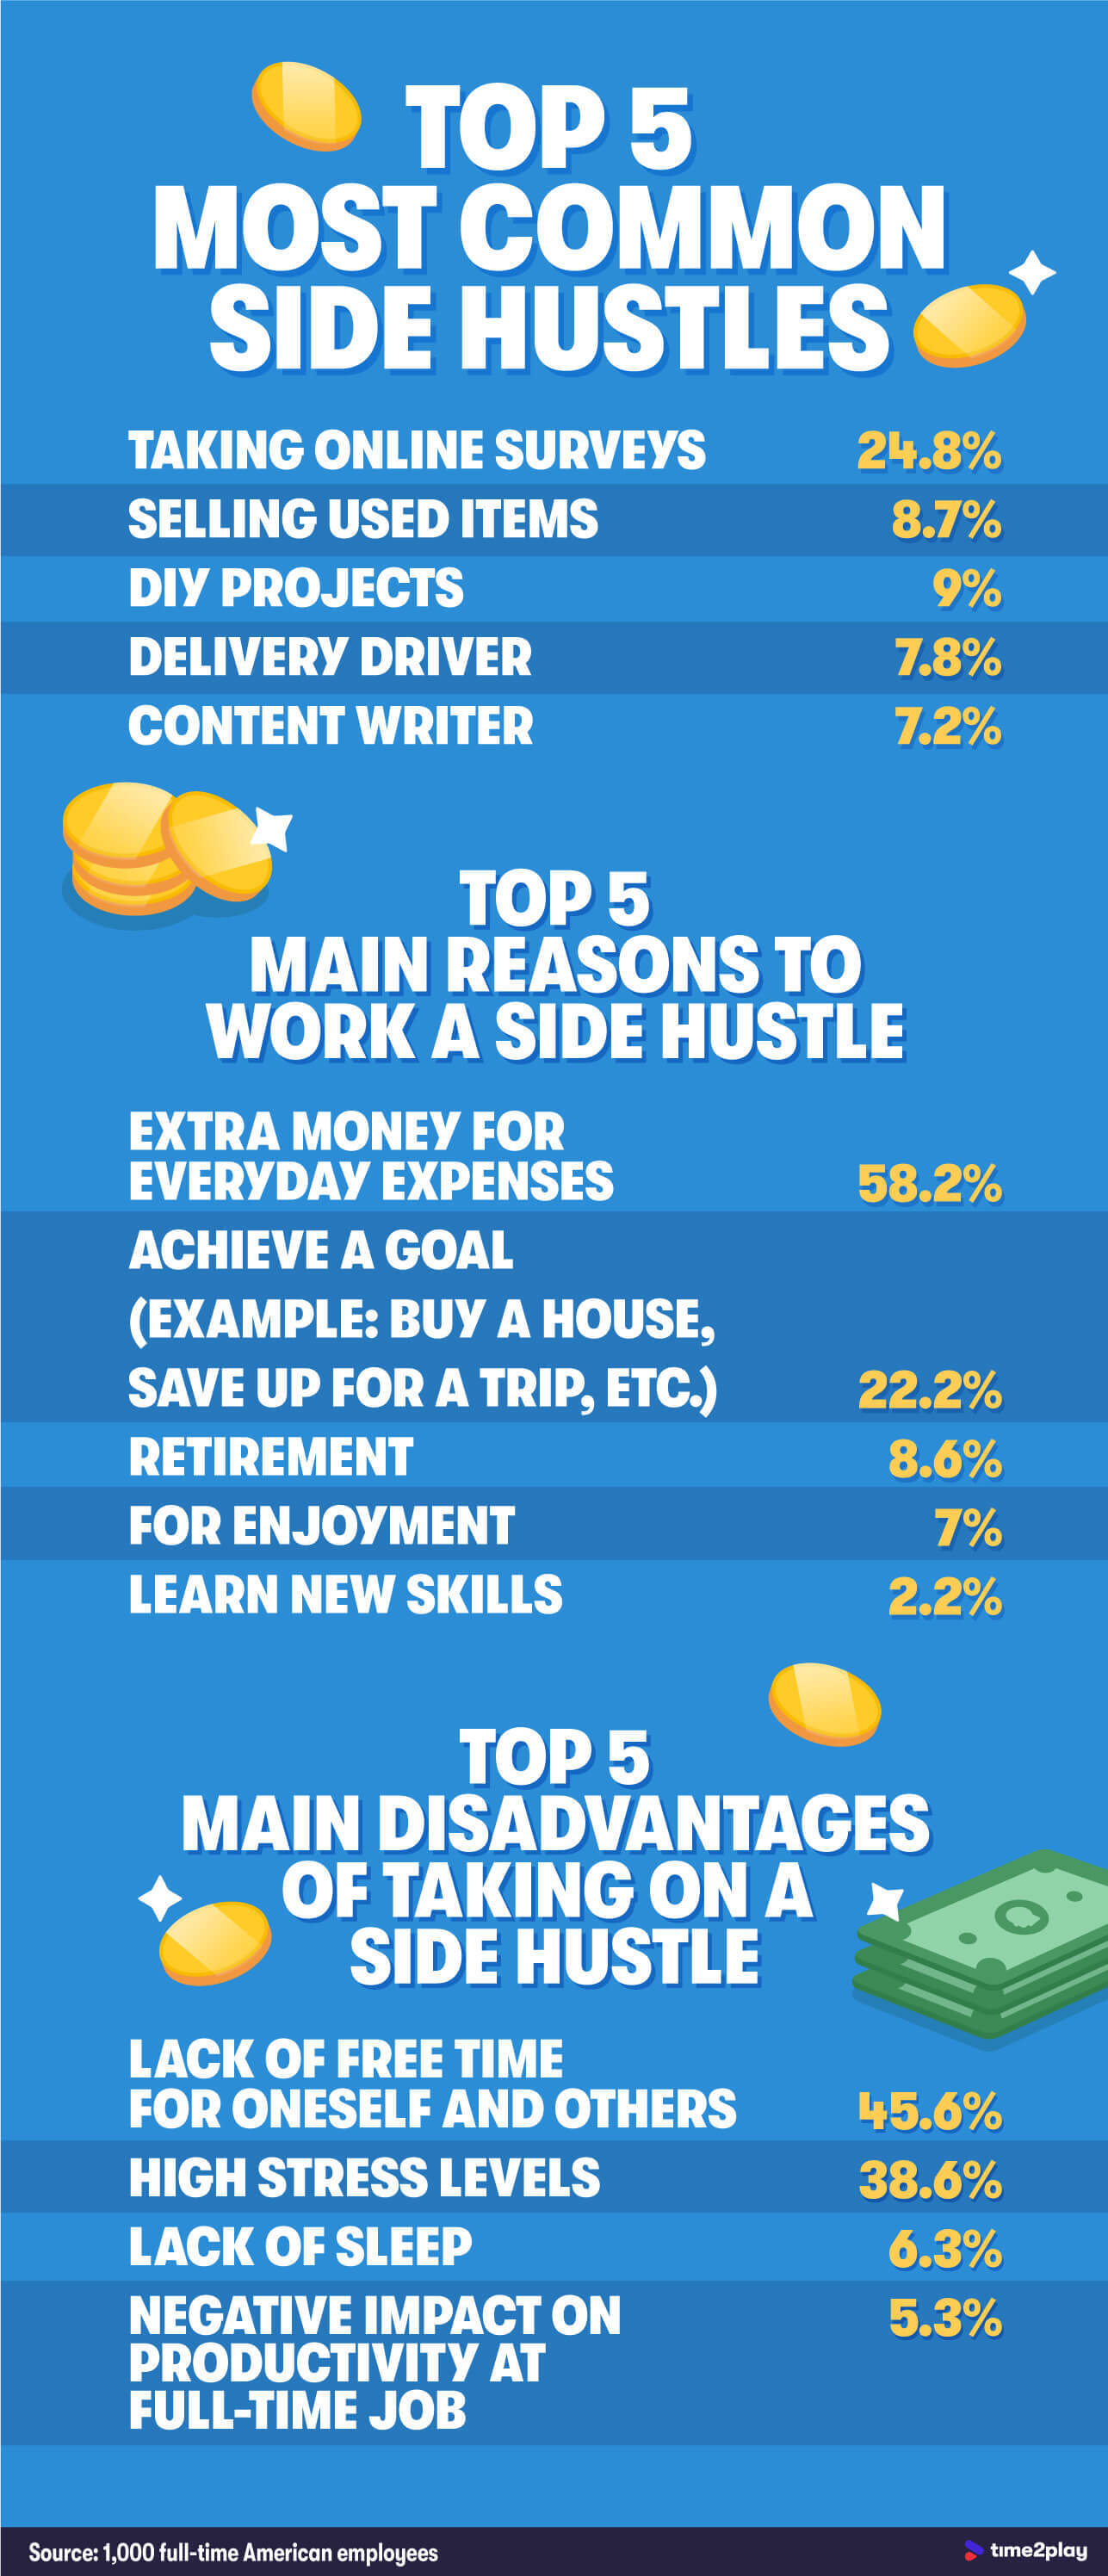 An infographic showing the top five side hustles, reasons to work a side hustle, and the main disadvantages.